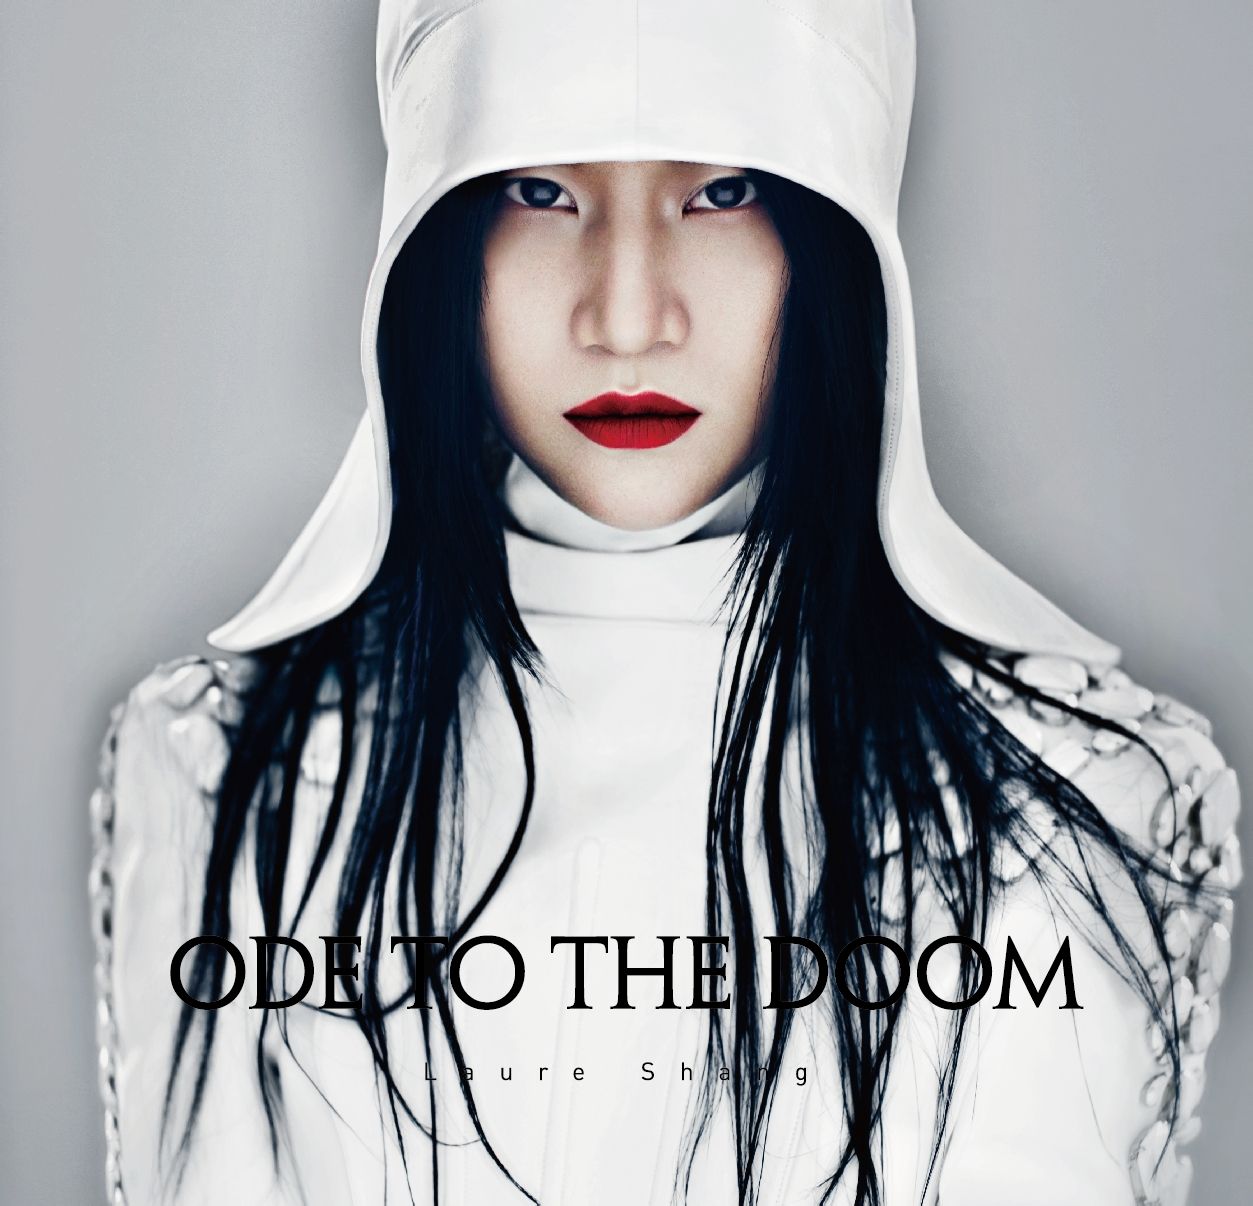 Ode to The Doom(最後的讚歌)